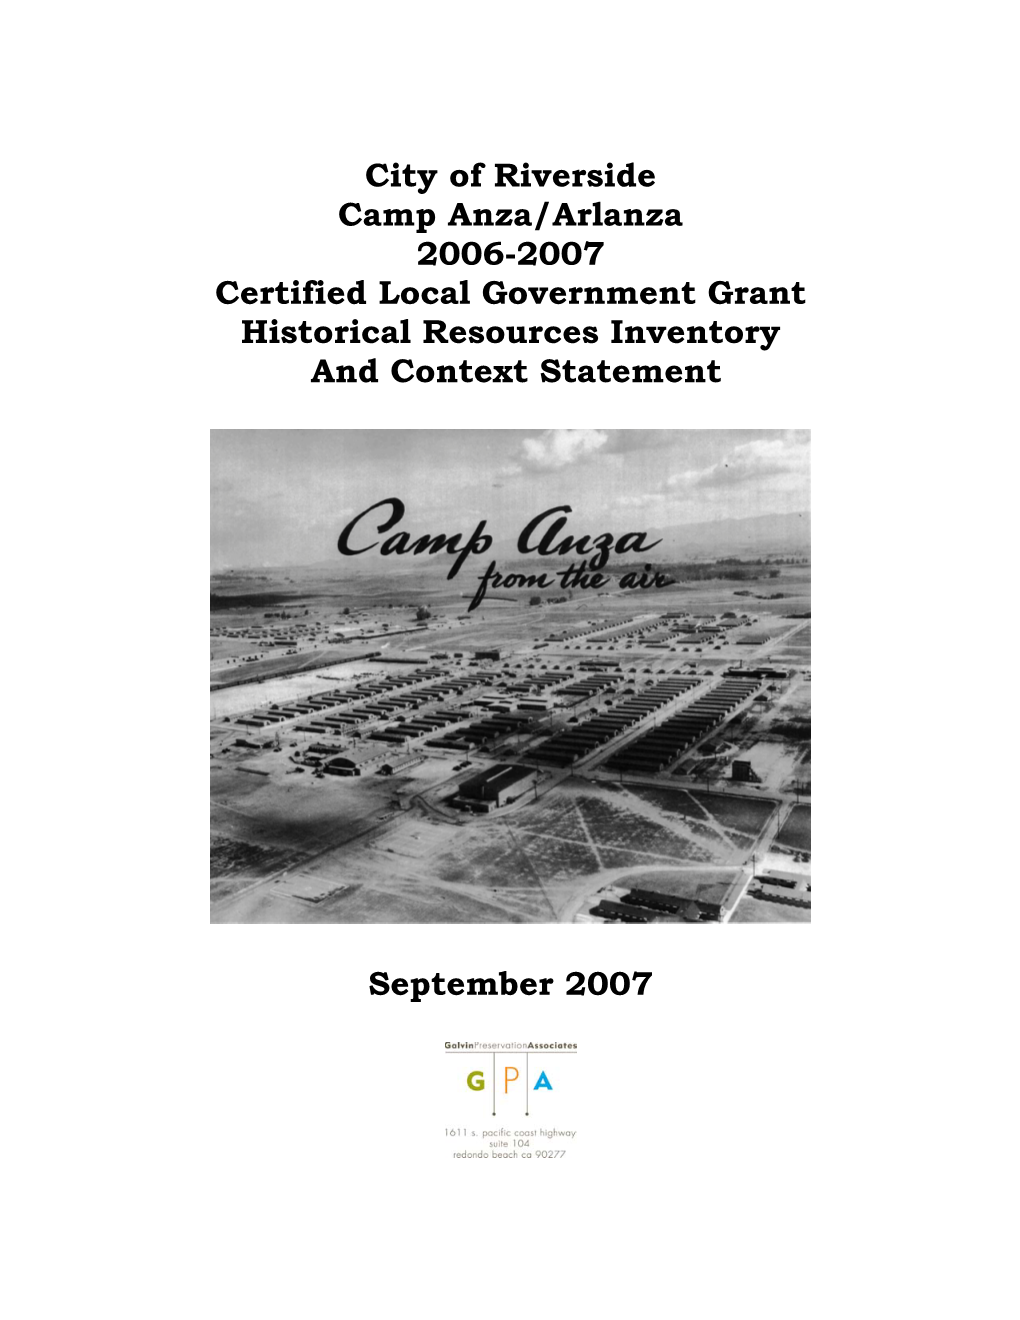 City of Riverside Camp Anza/Arlanza 2006-2007 Certified Local Government Grant Historical Resources Inventory and Context Statement